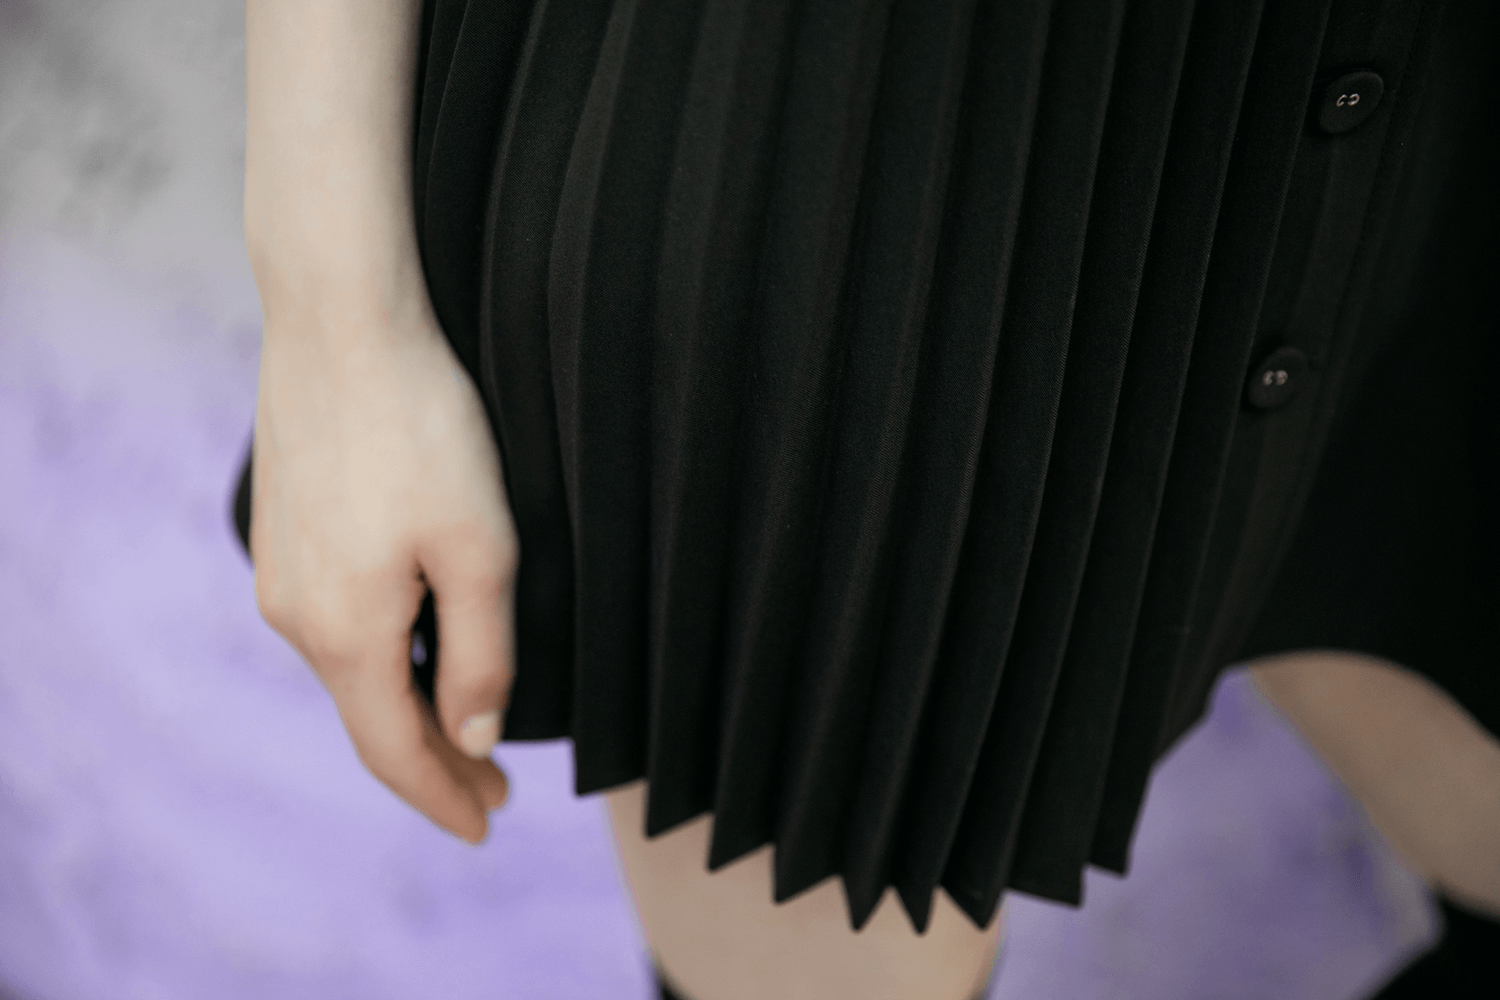 Sophisticated Black Collared Pleated Mini Dress